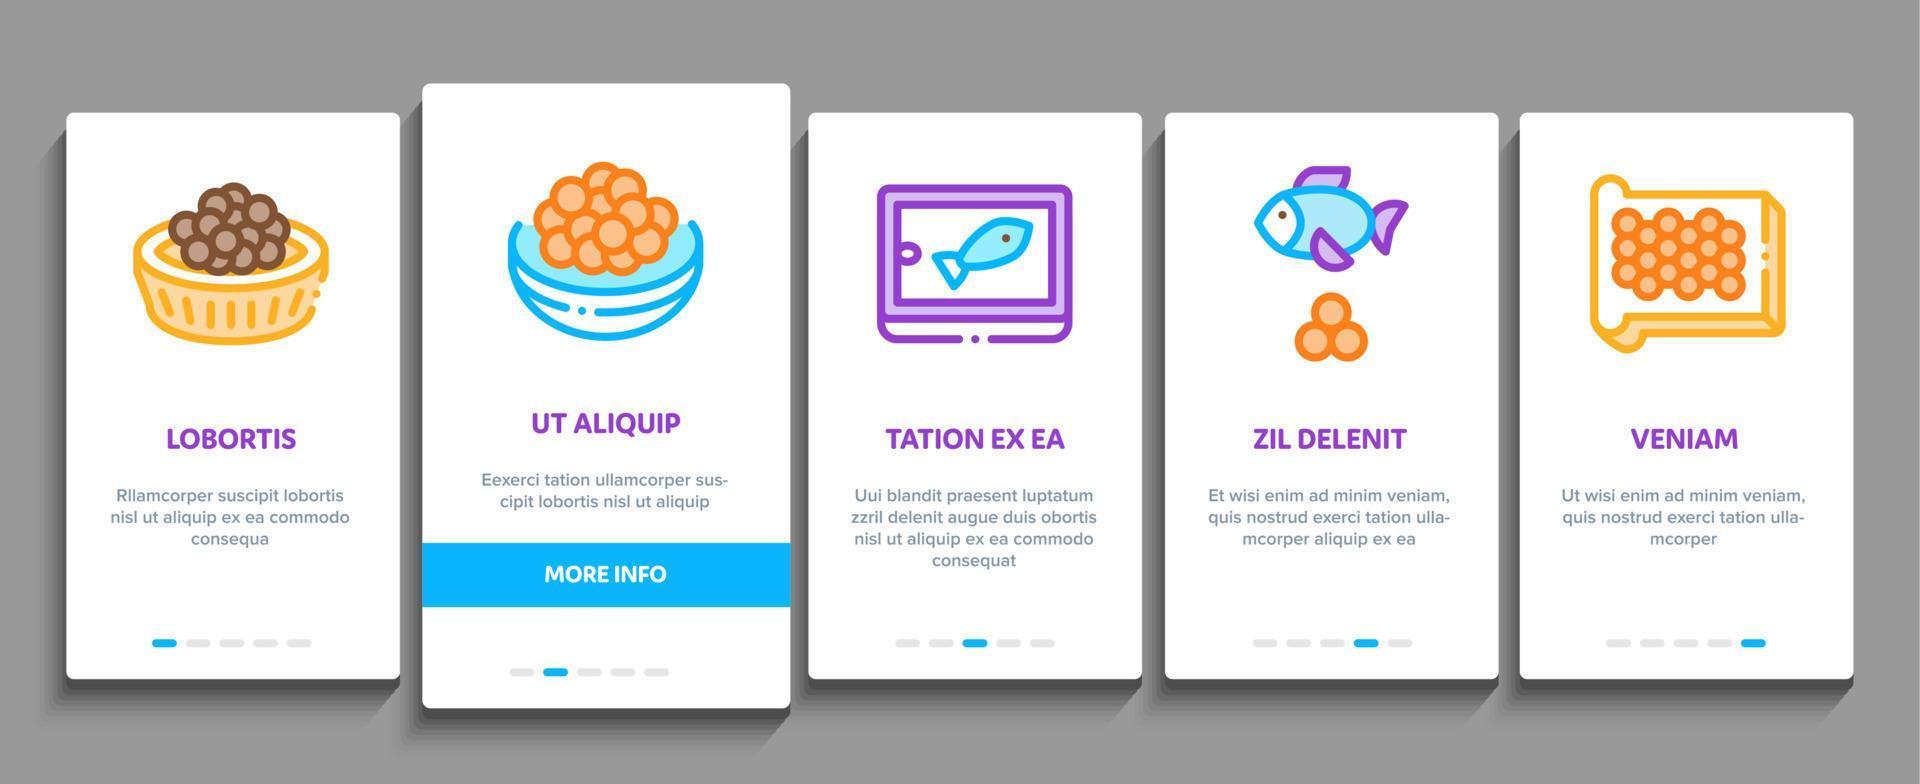 Caviar Seafood Product Onboarding Elements Icons Set Vector